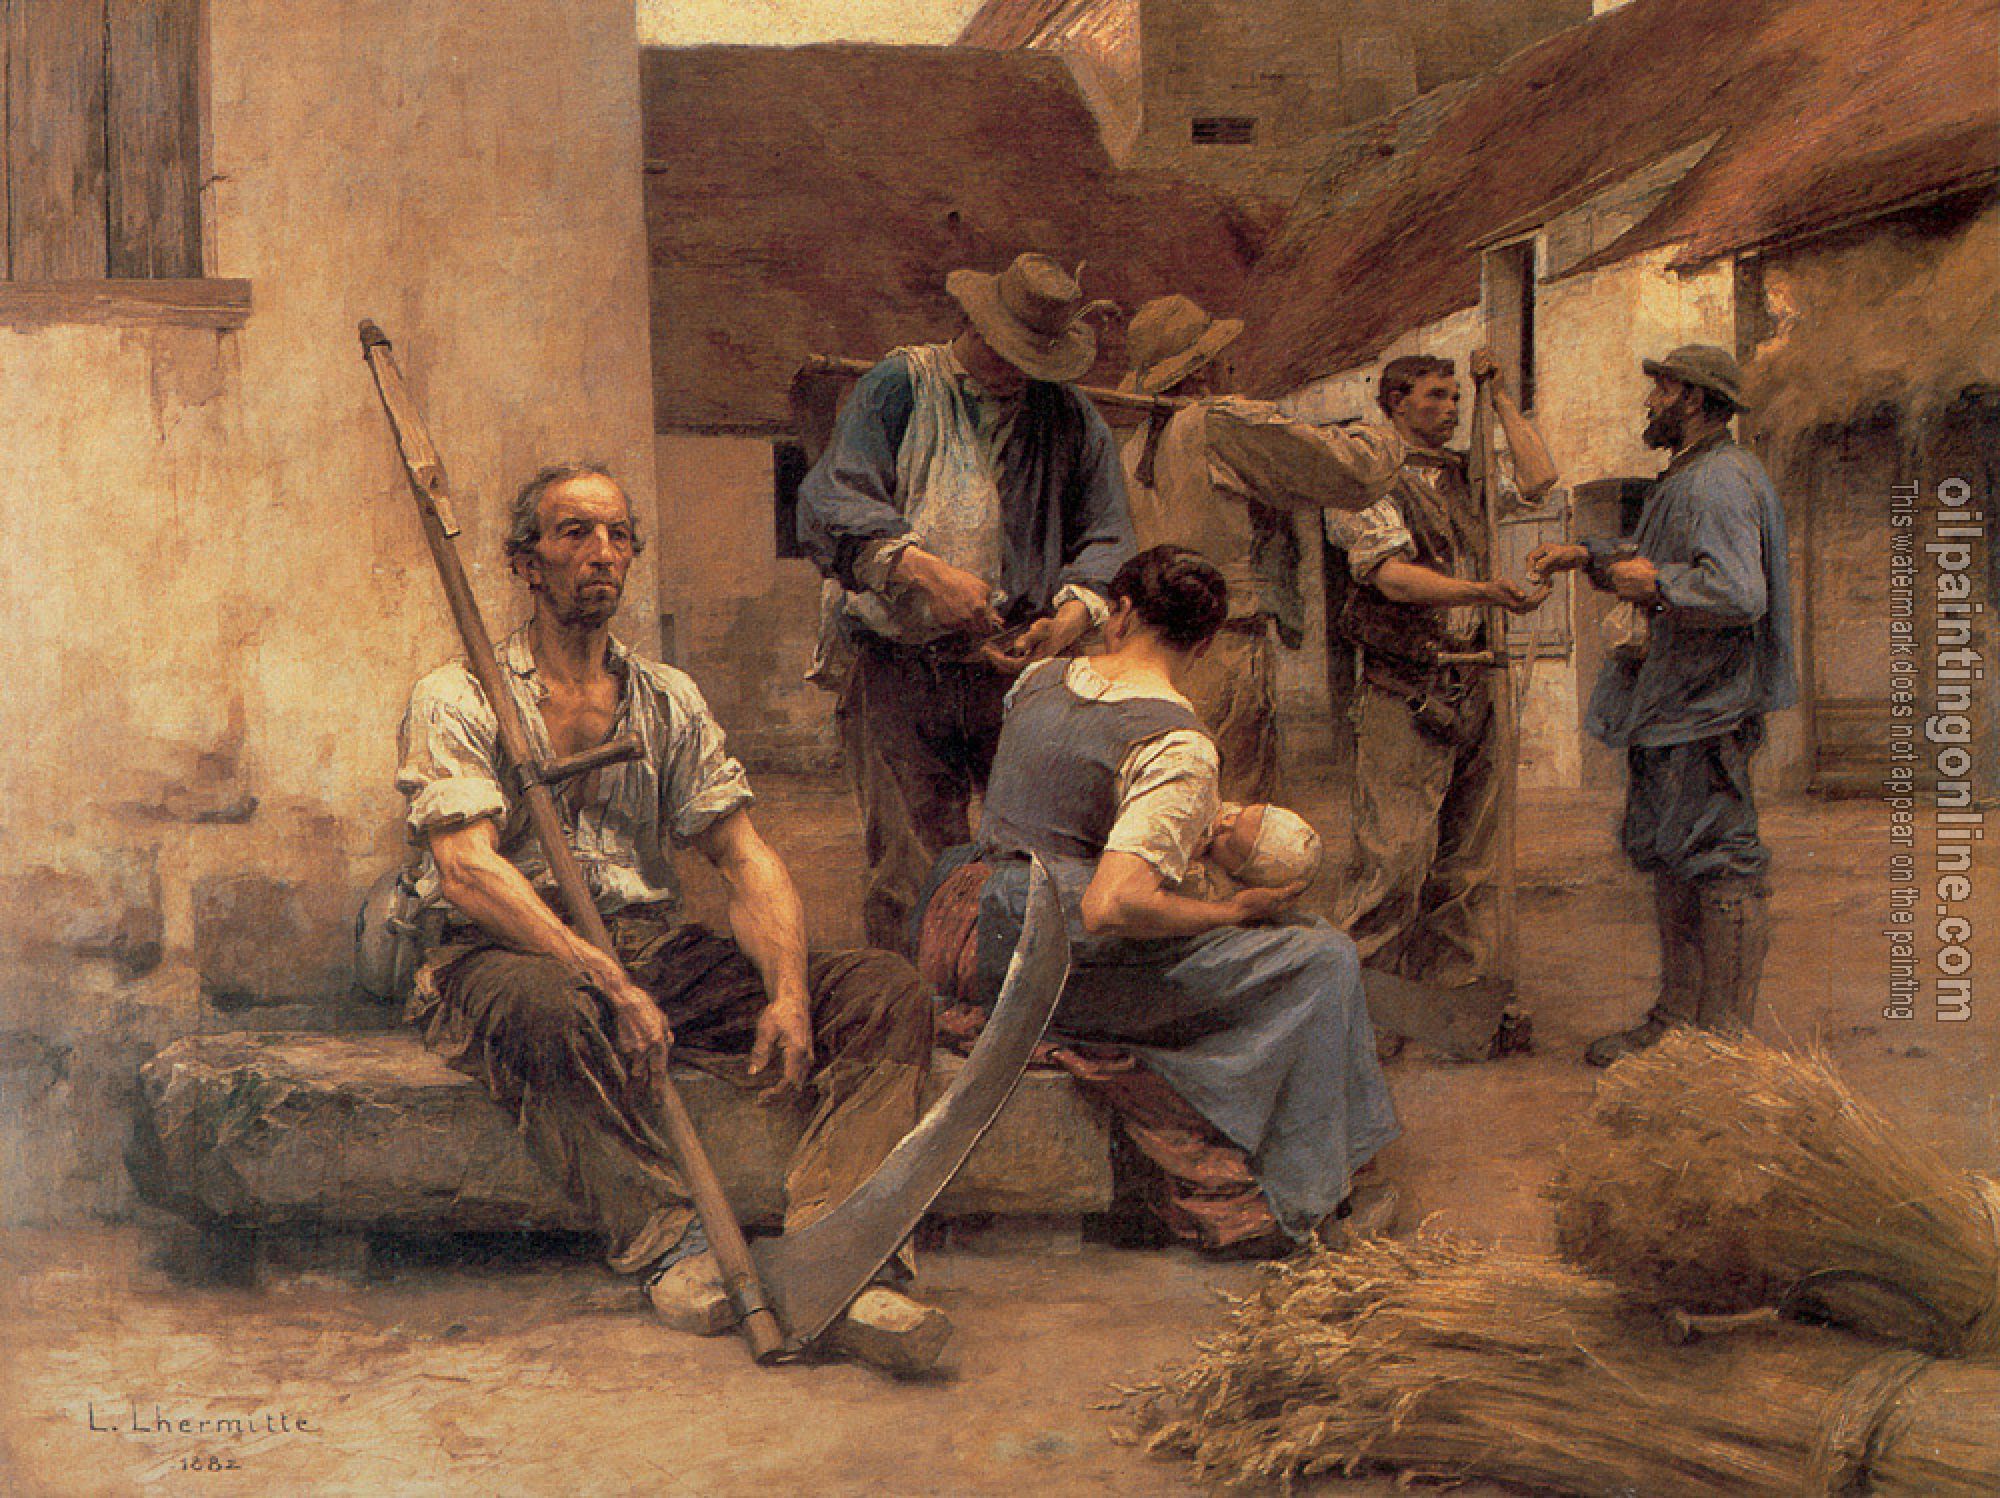 Lhermitte, Leon Augustin - Paying the Harvesters